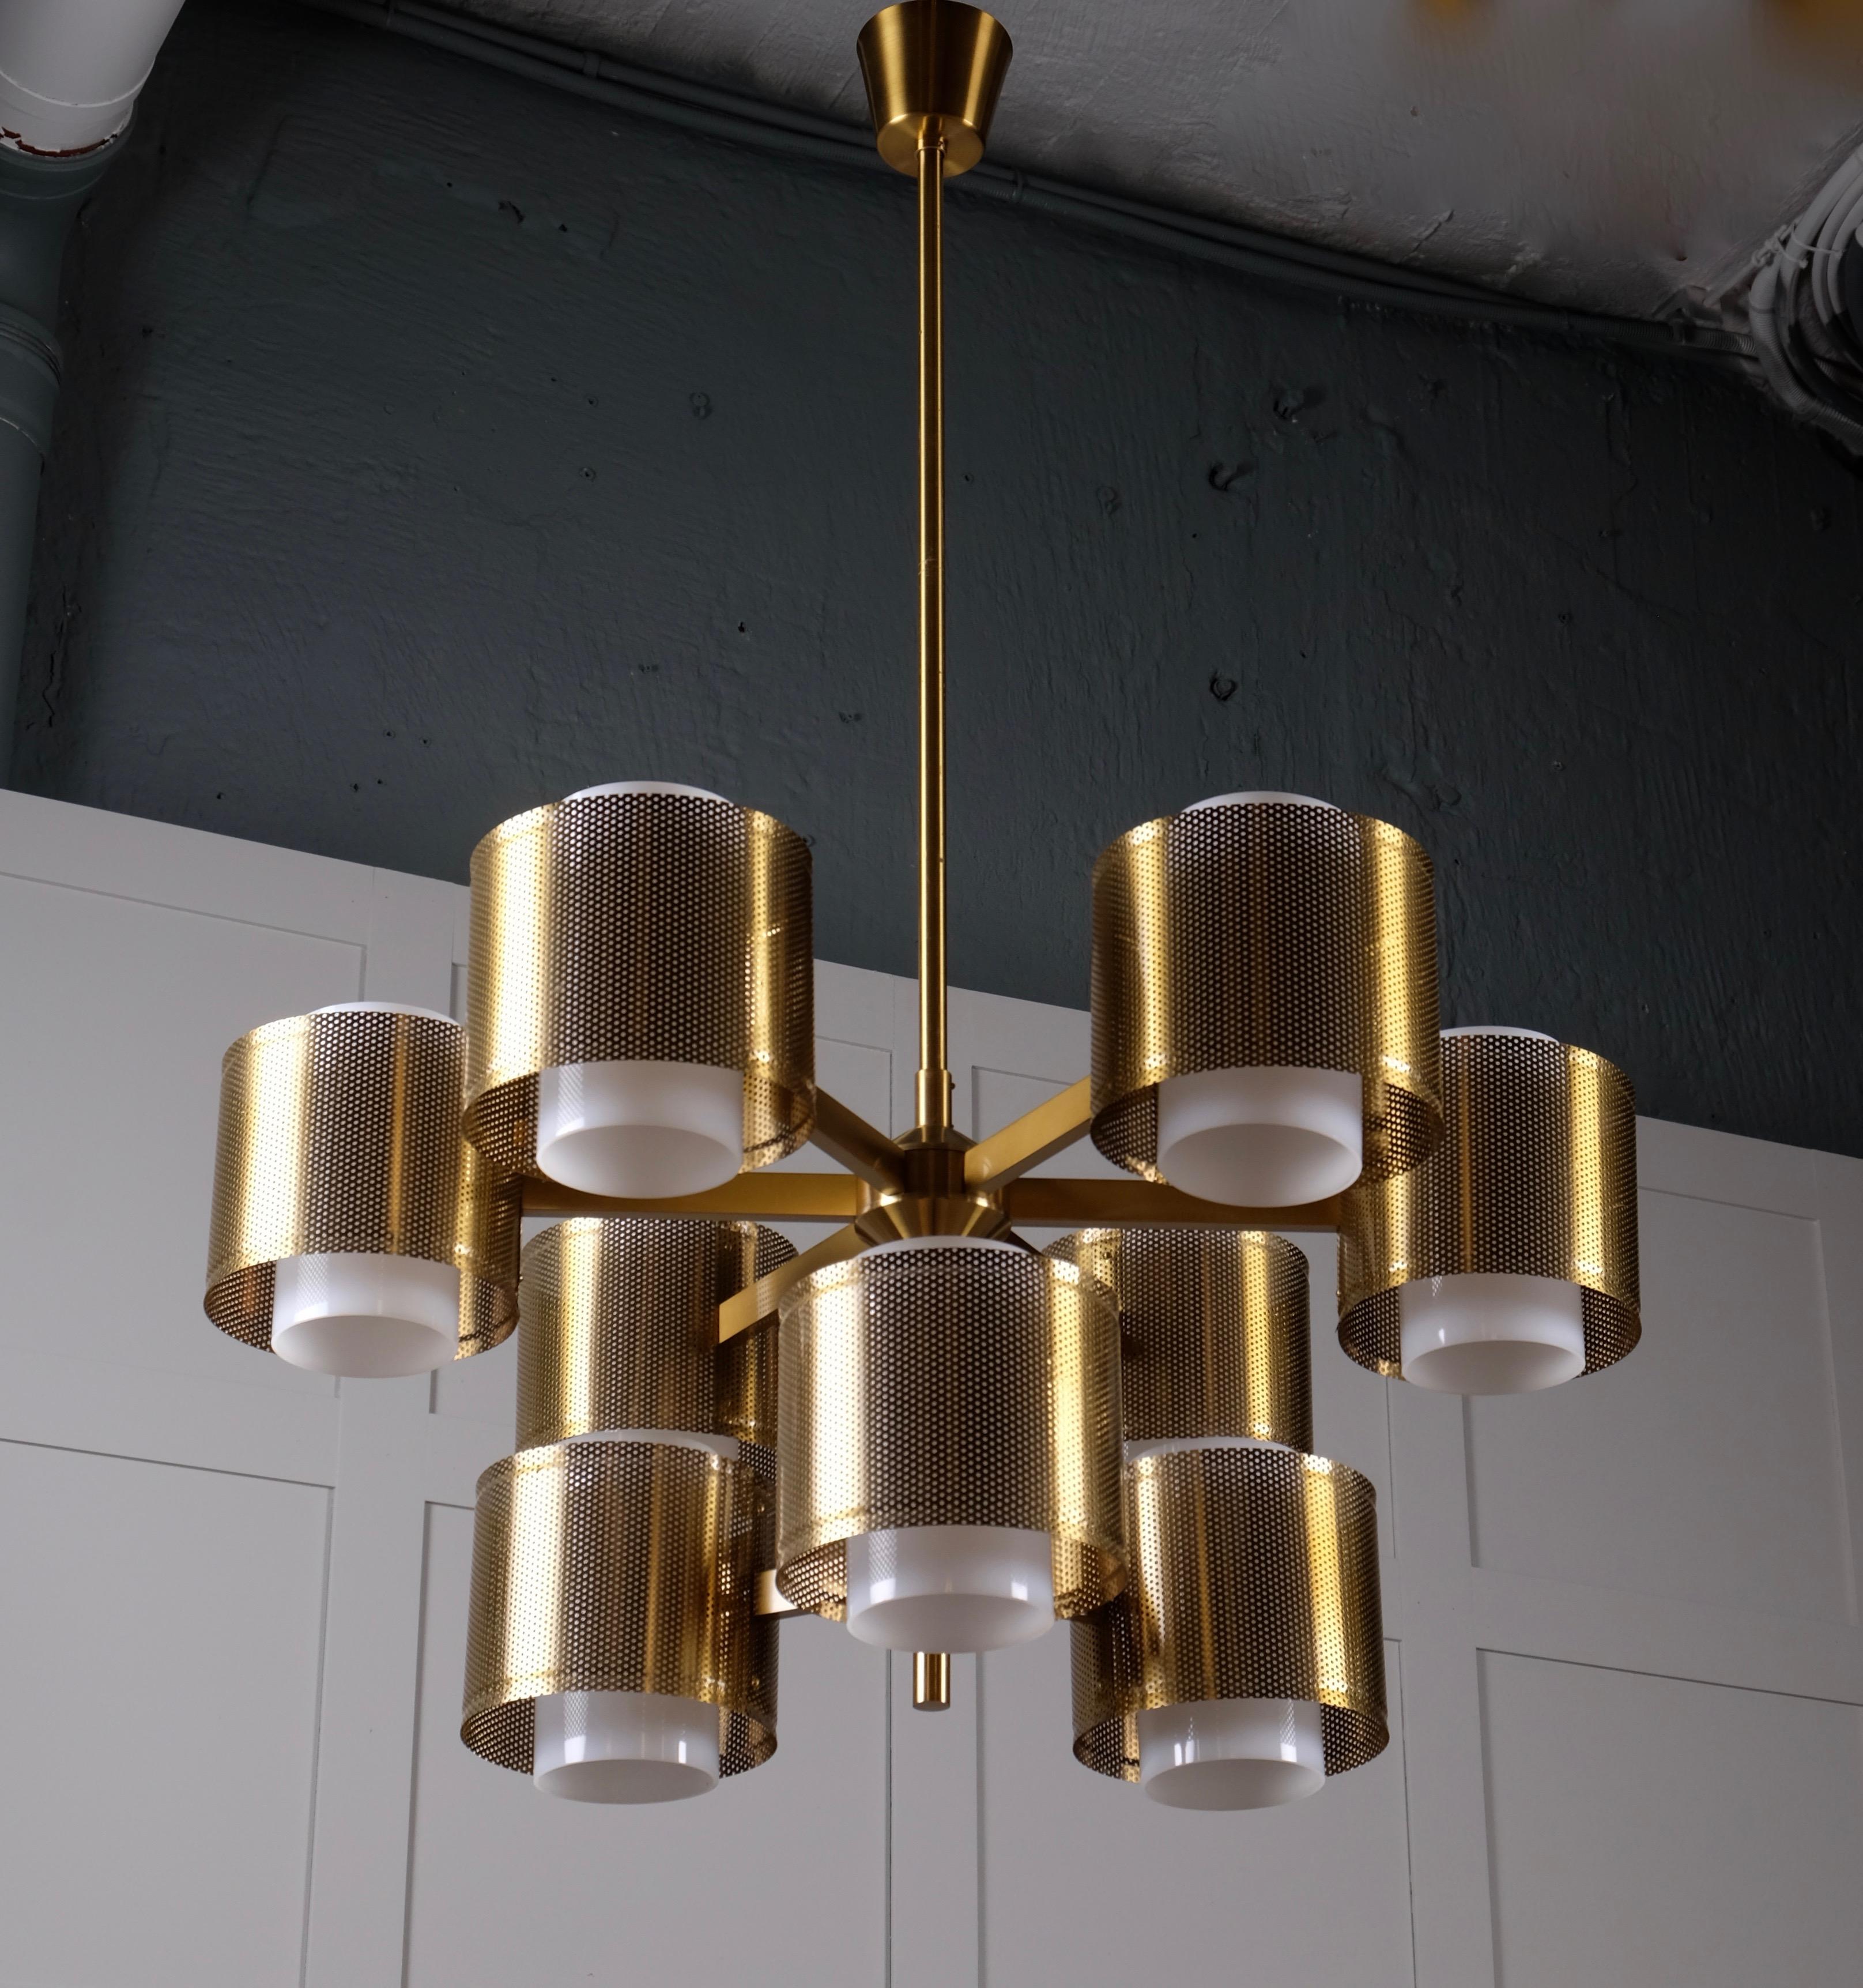 Mid-20th Century Set of 3 Brass Chandeliers by Holger Johansson, Sweden, 1960s For Sale